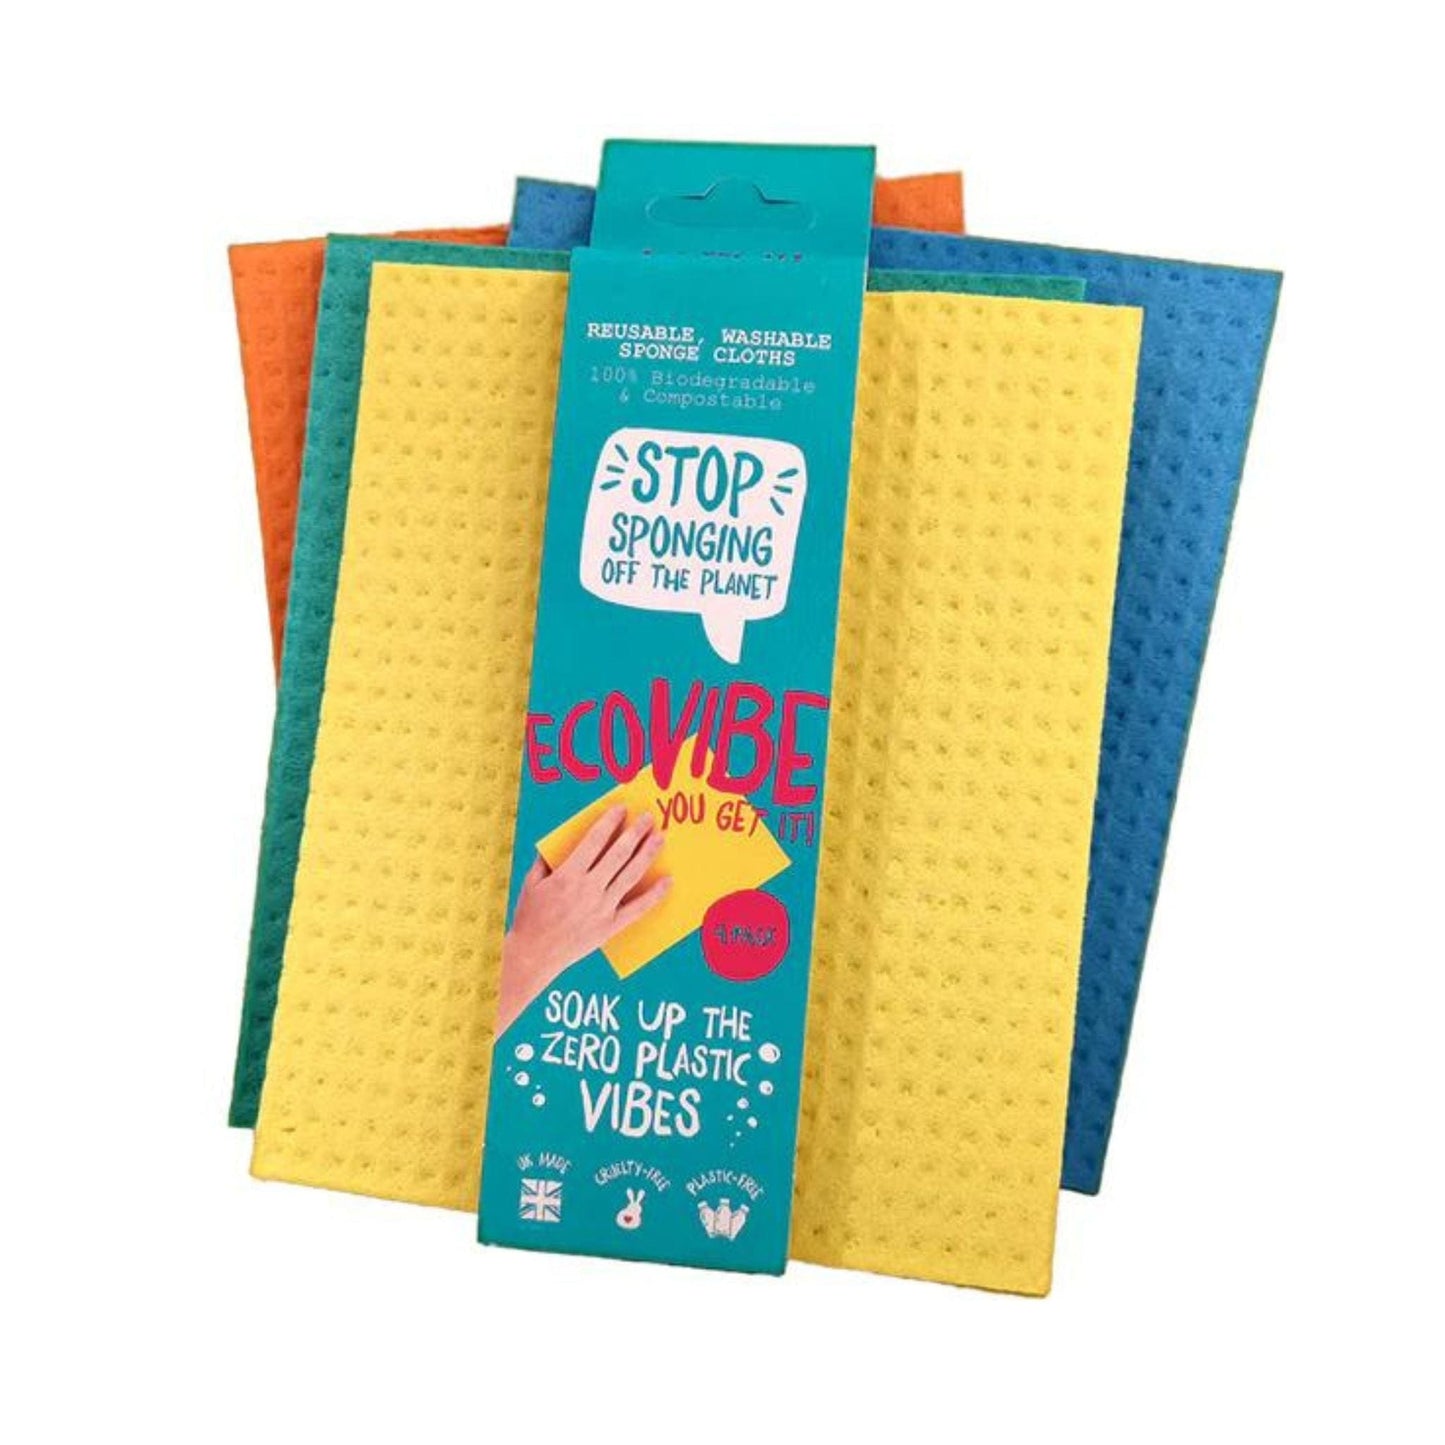 EcoVibe Shop Towels & General-Purpose Cleaning Cloths Reusable and Washable Compostable Sponge Cloths - 4 Pack - EcoVibe